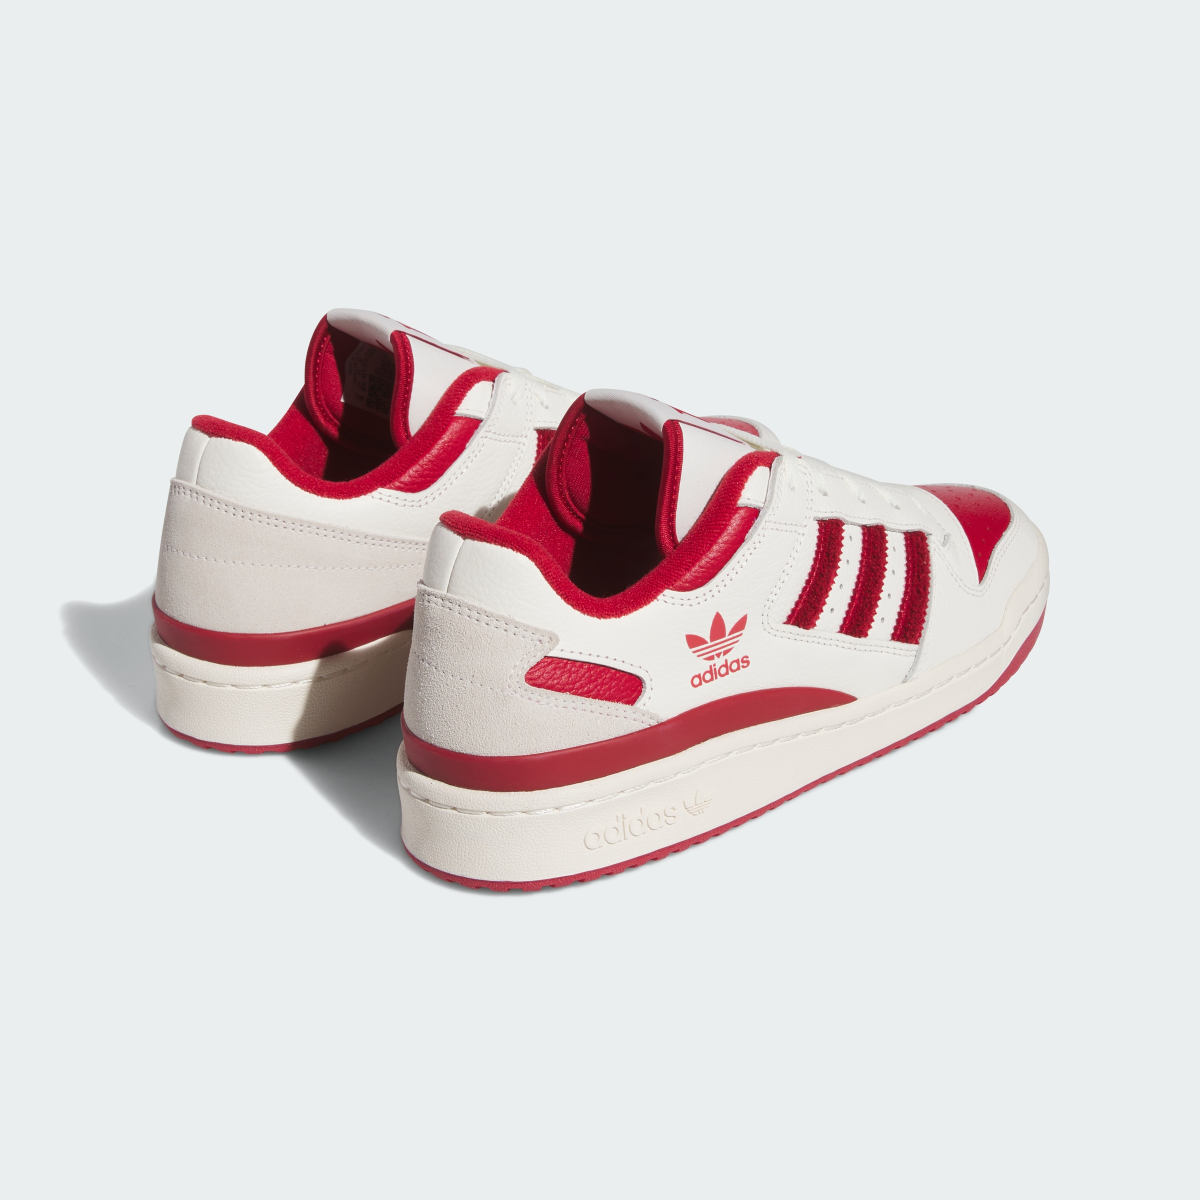 Adidas Indiana Forum Low Shoes. 6